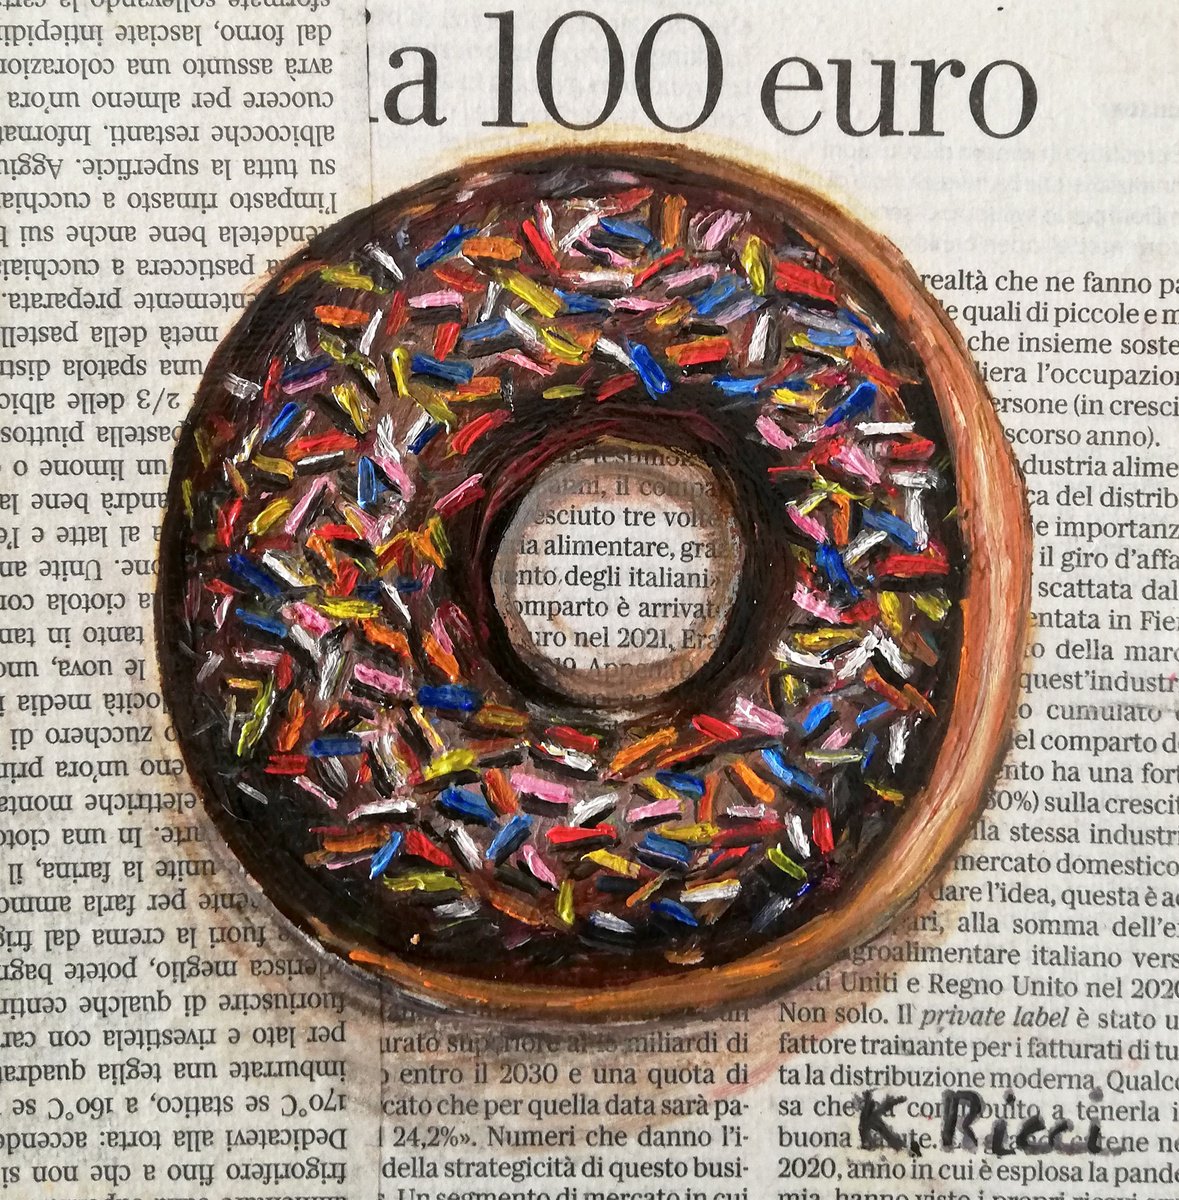 Brown Donut on Newspaper Original Oil on Canvas Board Painting 6 by 6 inches (15x15 cm) by Katia Ricci